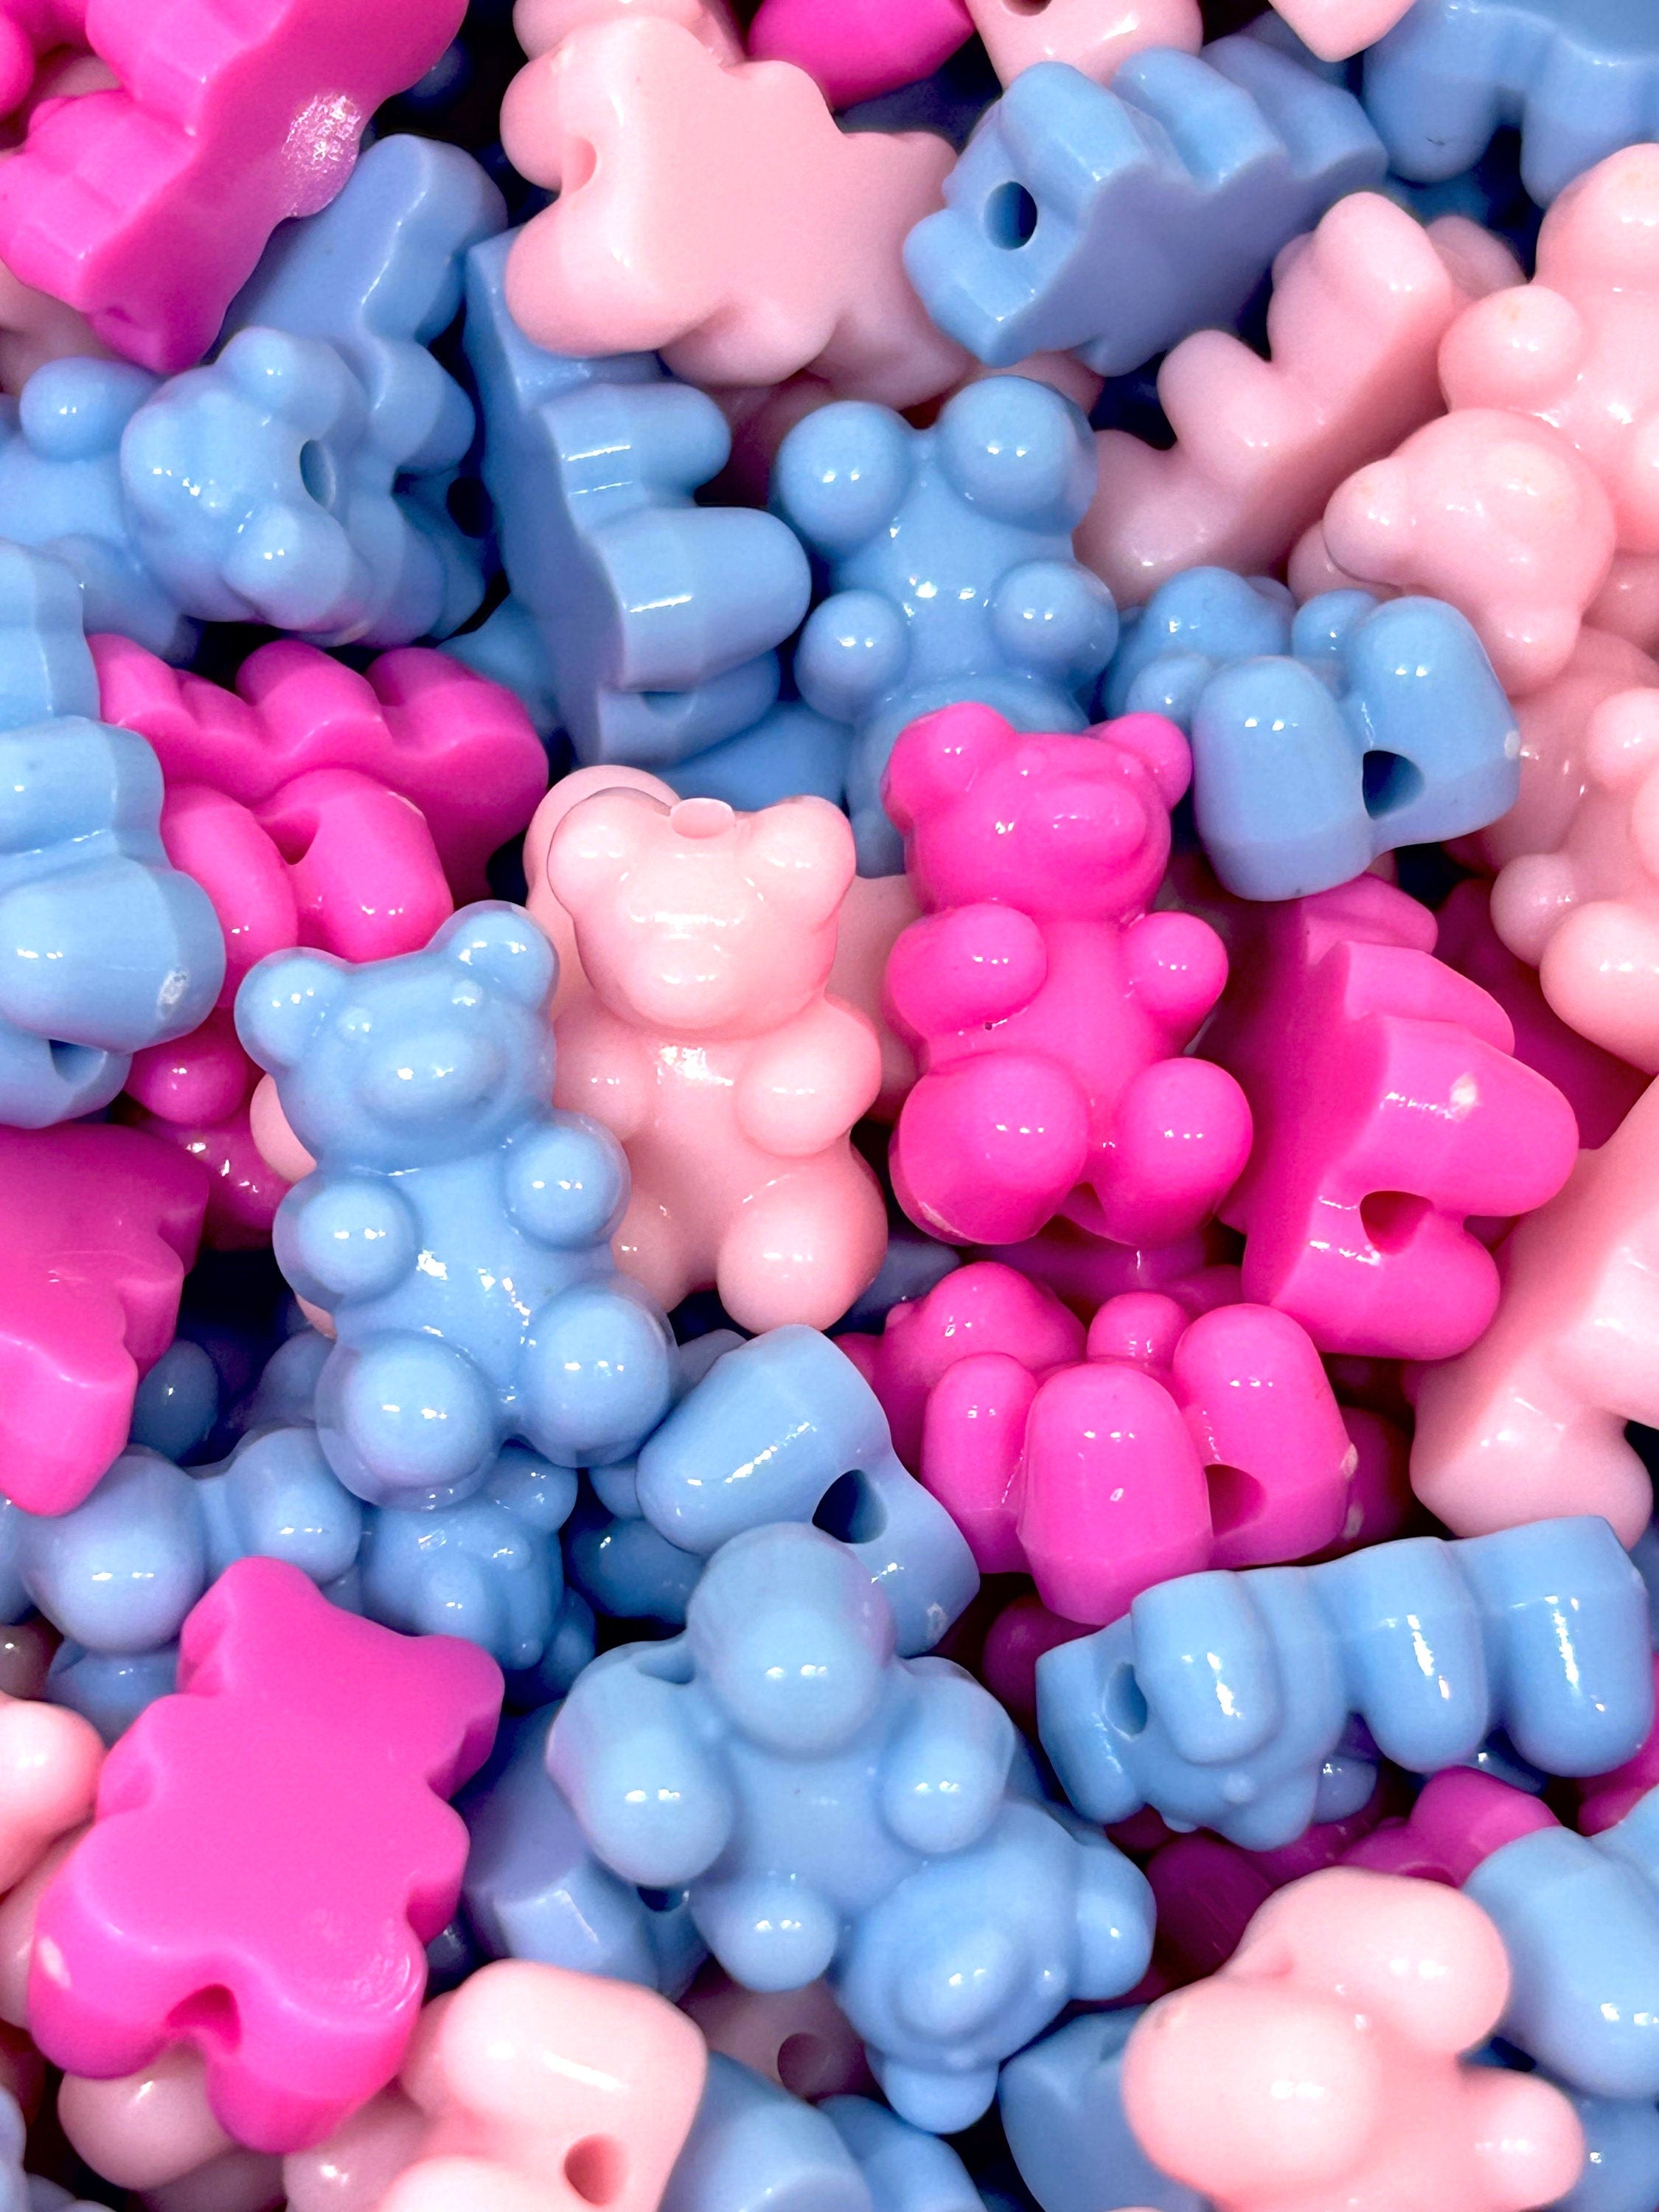 Lifesize Gummy Bear Beads in Cotton Candy Colors by Madison Beads - Fun and  Unique Beads for Vibrant Jewelry and Crafts